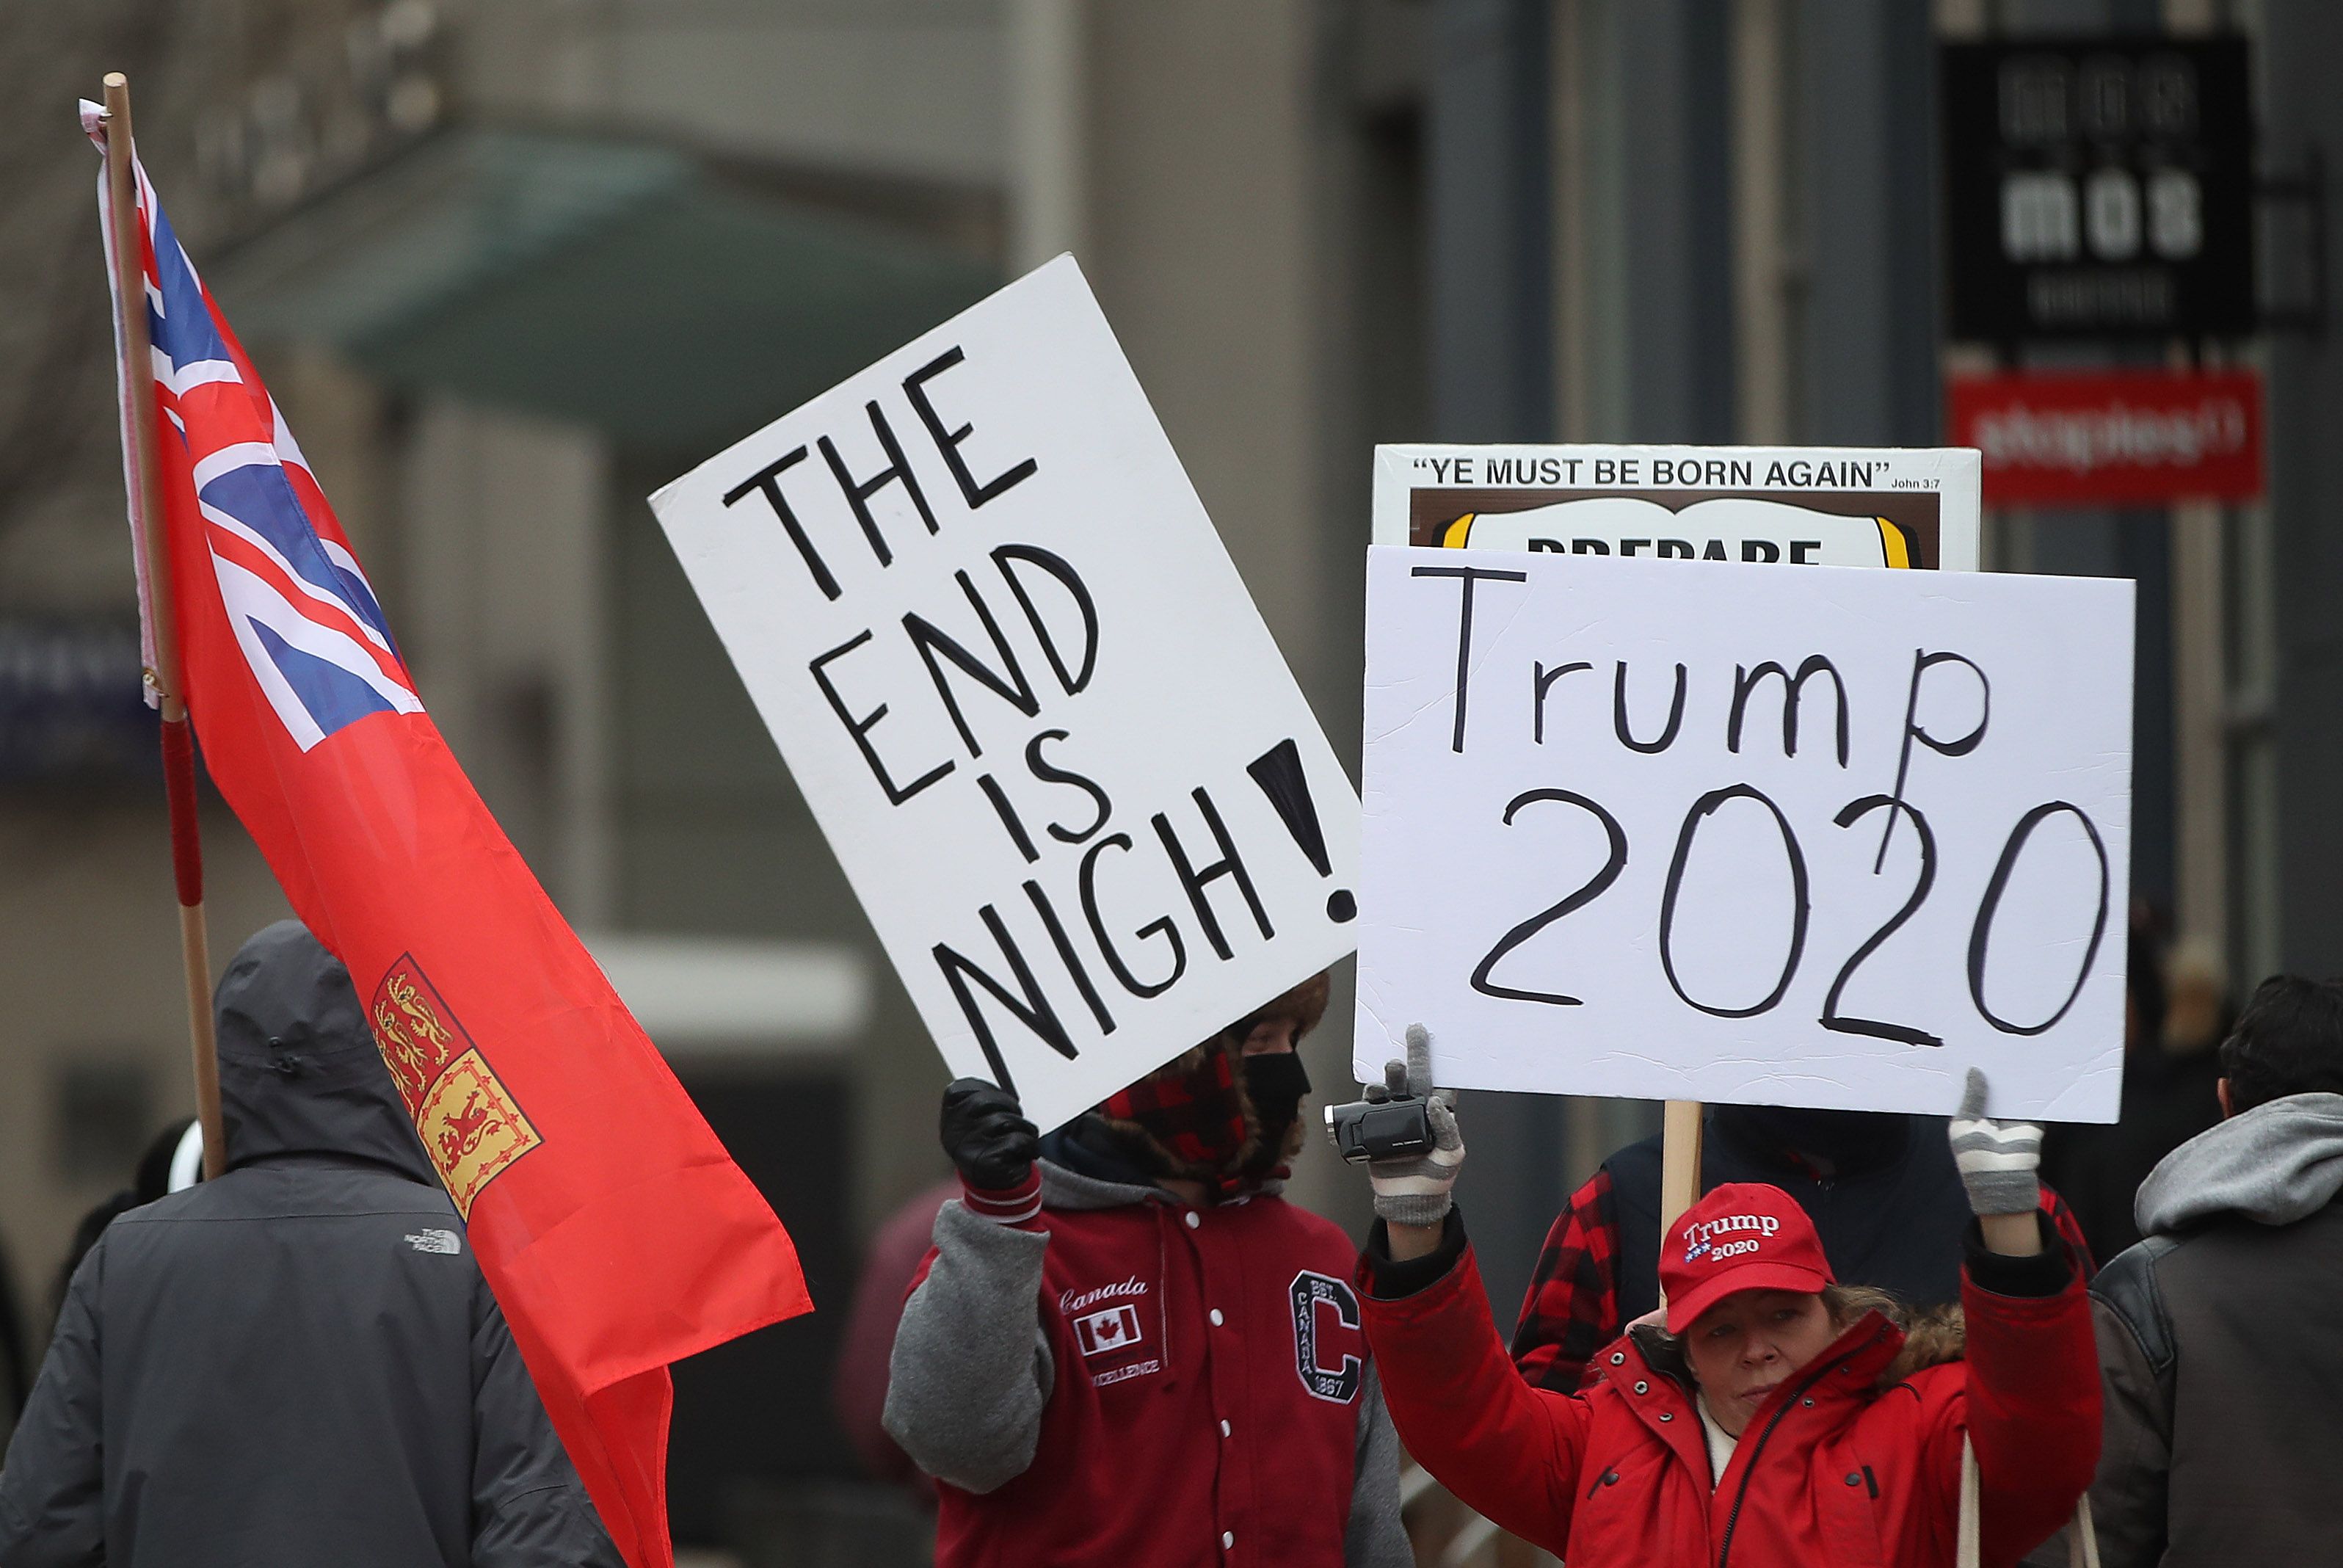  Counter protesters hold signs as peace advocates hold a rally in front of the American Consulate in Toronto. January 4, 2020. (Steve Russell/Toronto Star via Getty Images)